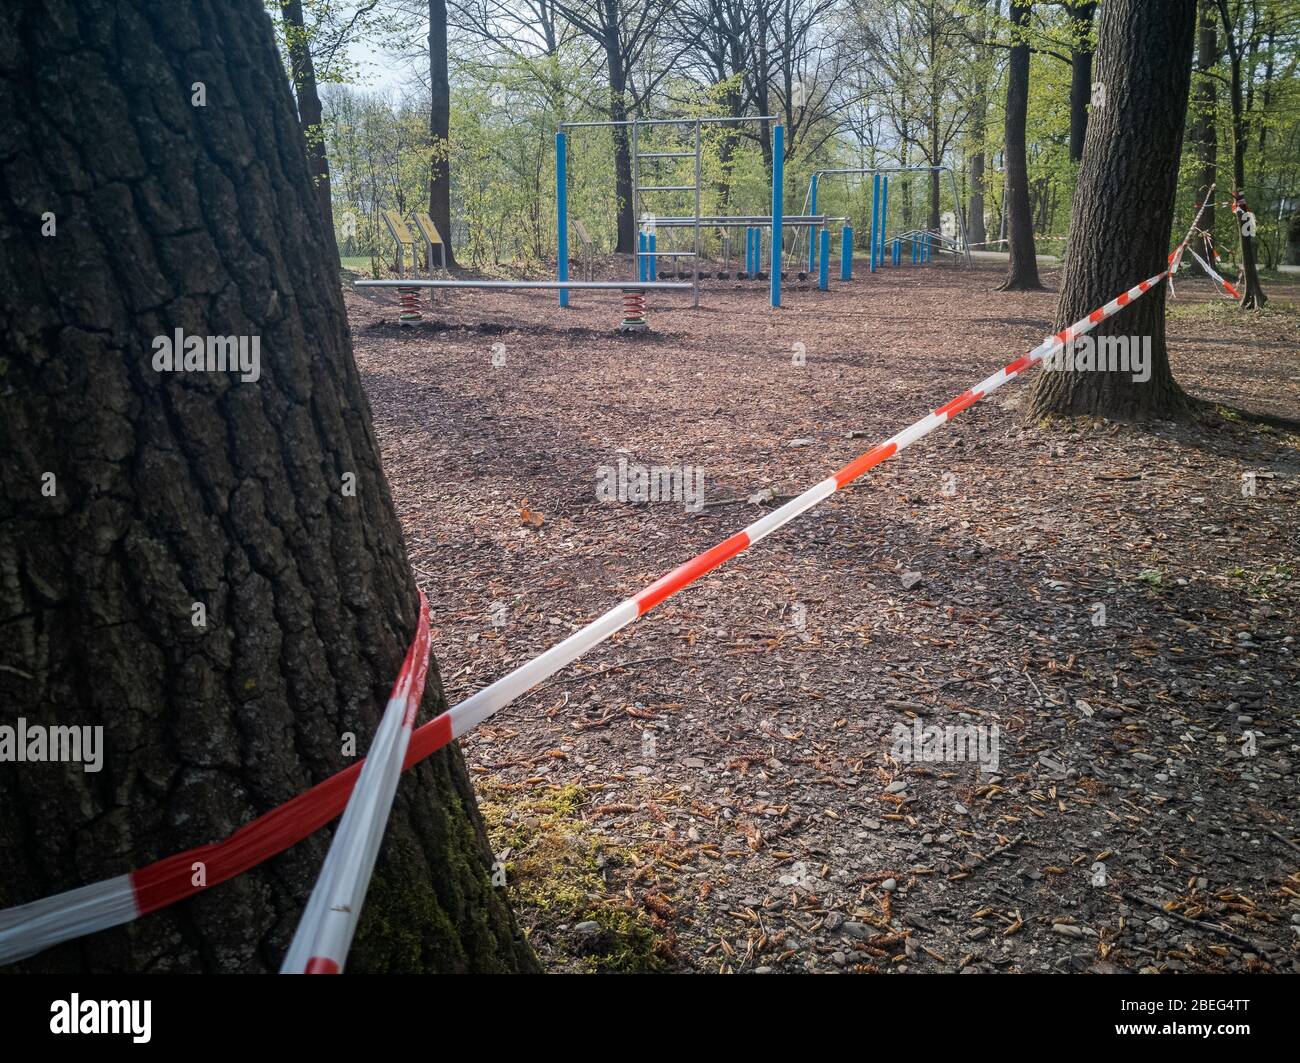 Outdoor workout trainings grounds blocked with barrier tape during Corona pandemic lockdown on Easter Monday 2020 in Regensburg, Bavaria, Germany Stock Photo